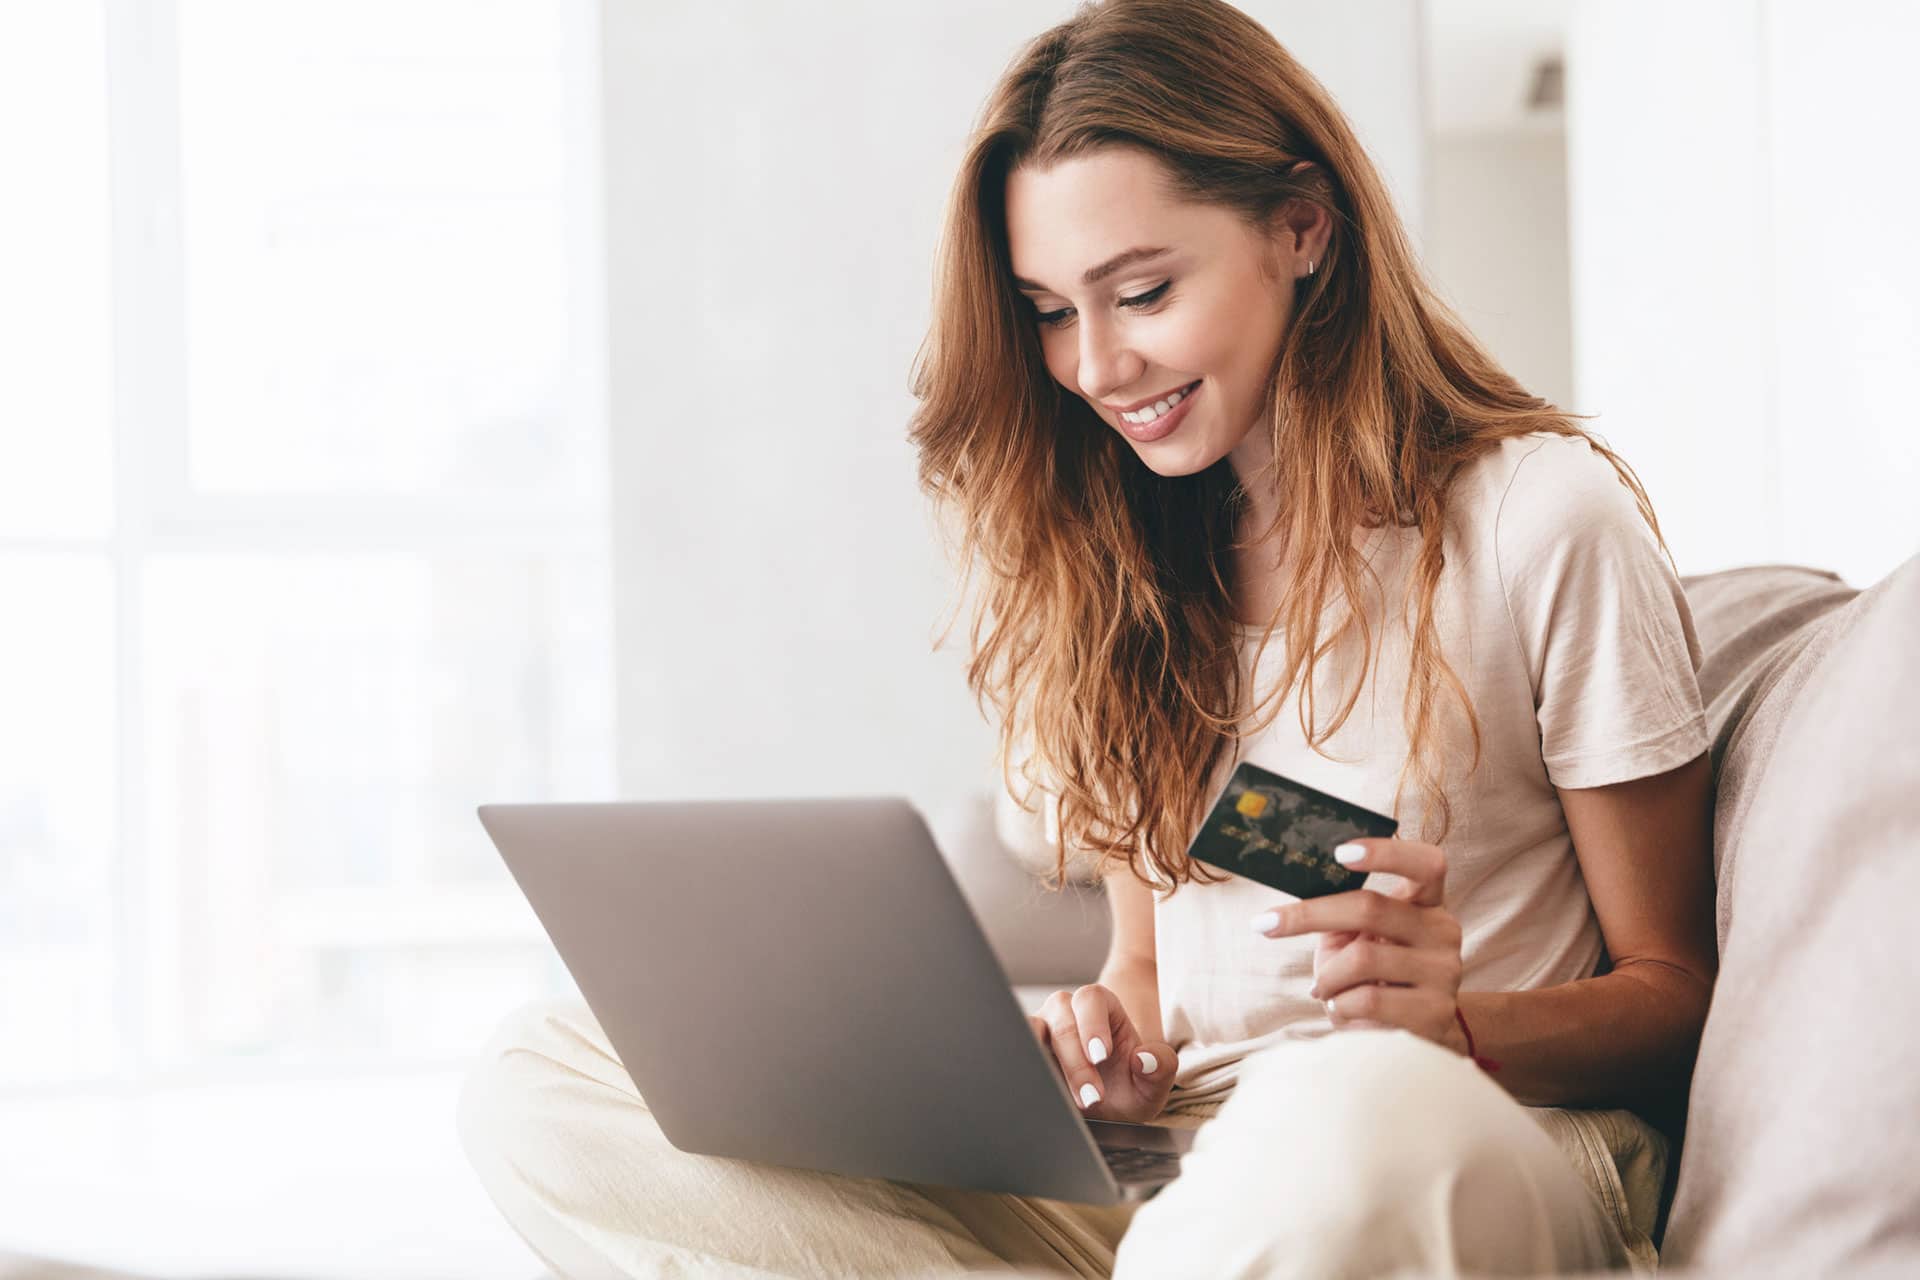 Woman with long brown hair in white outfit smiling, sitting on couch with laptop on lap and credit card in hand.